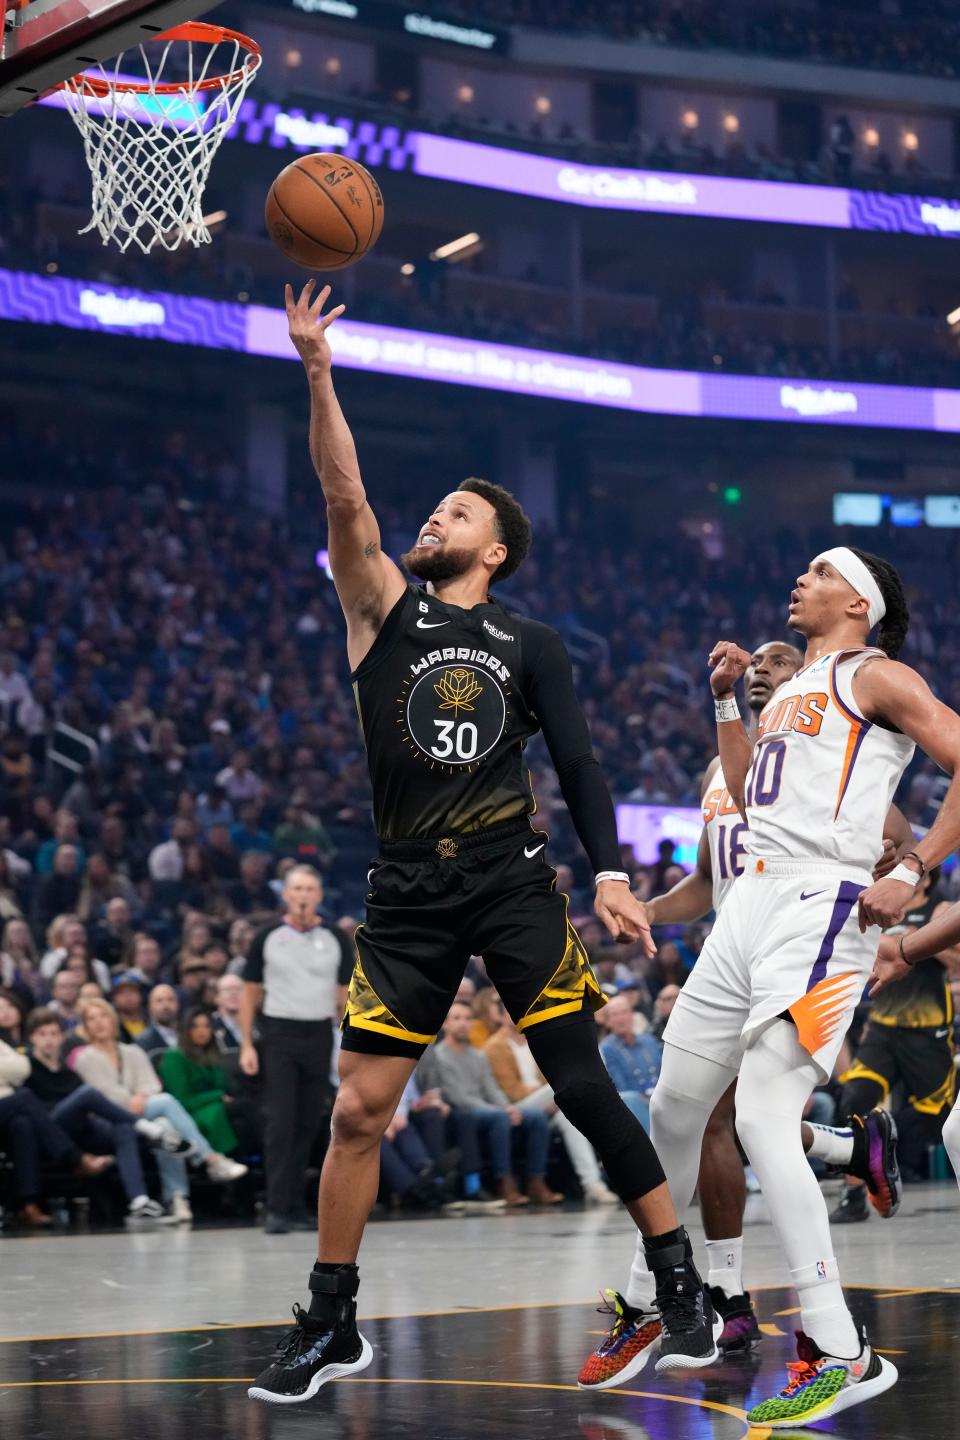 Golden State Warriors guard Stephen Curry (30) shoots next to Phoenix Suns' Damion Lee (10) during the first half of an NBA basketball game in San Francisco, Tuesday, Jan. 10, 2023. (AP Photo/Godofredo A. Vásquez)